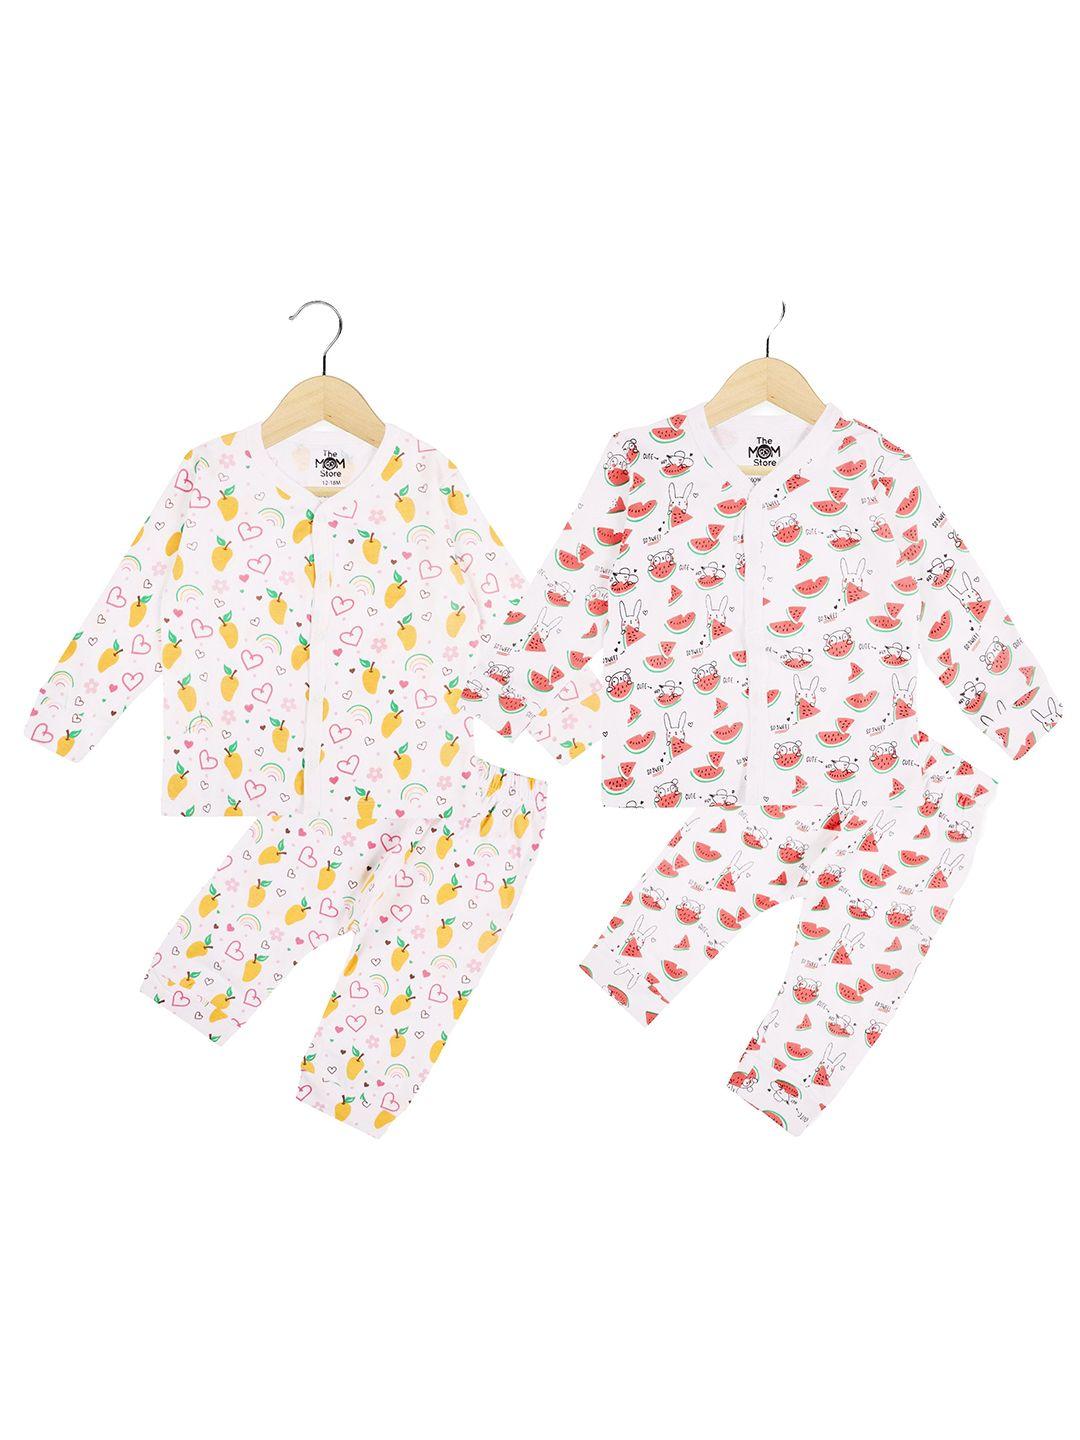 the mom store infants pack of 2 white printed pure cotton jhabla with trousers